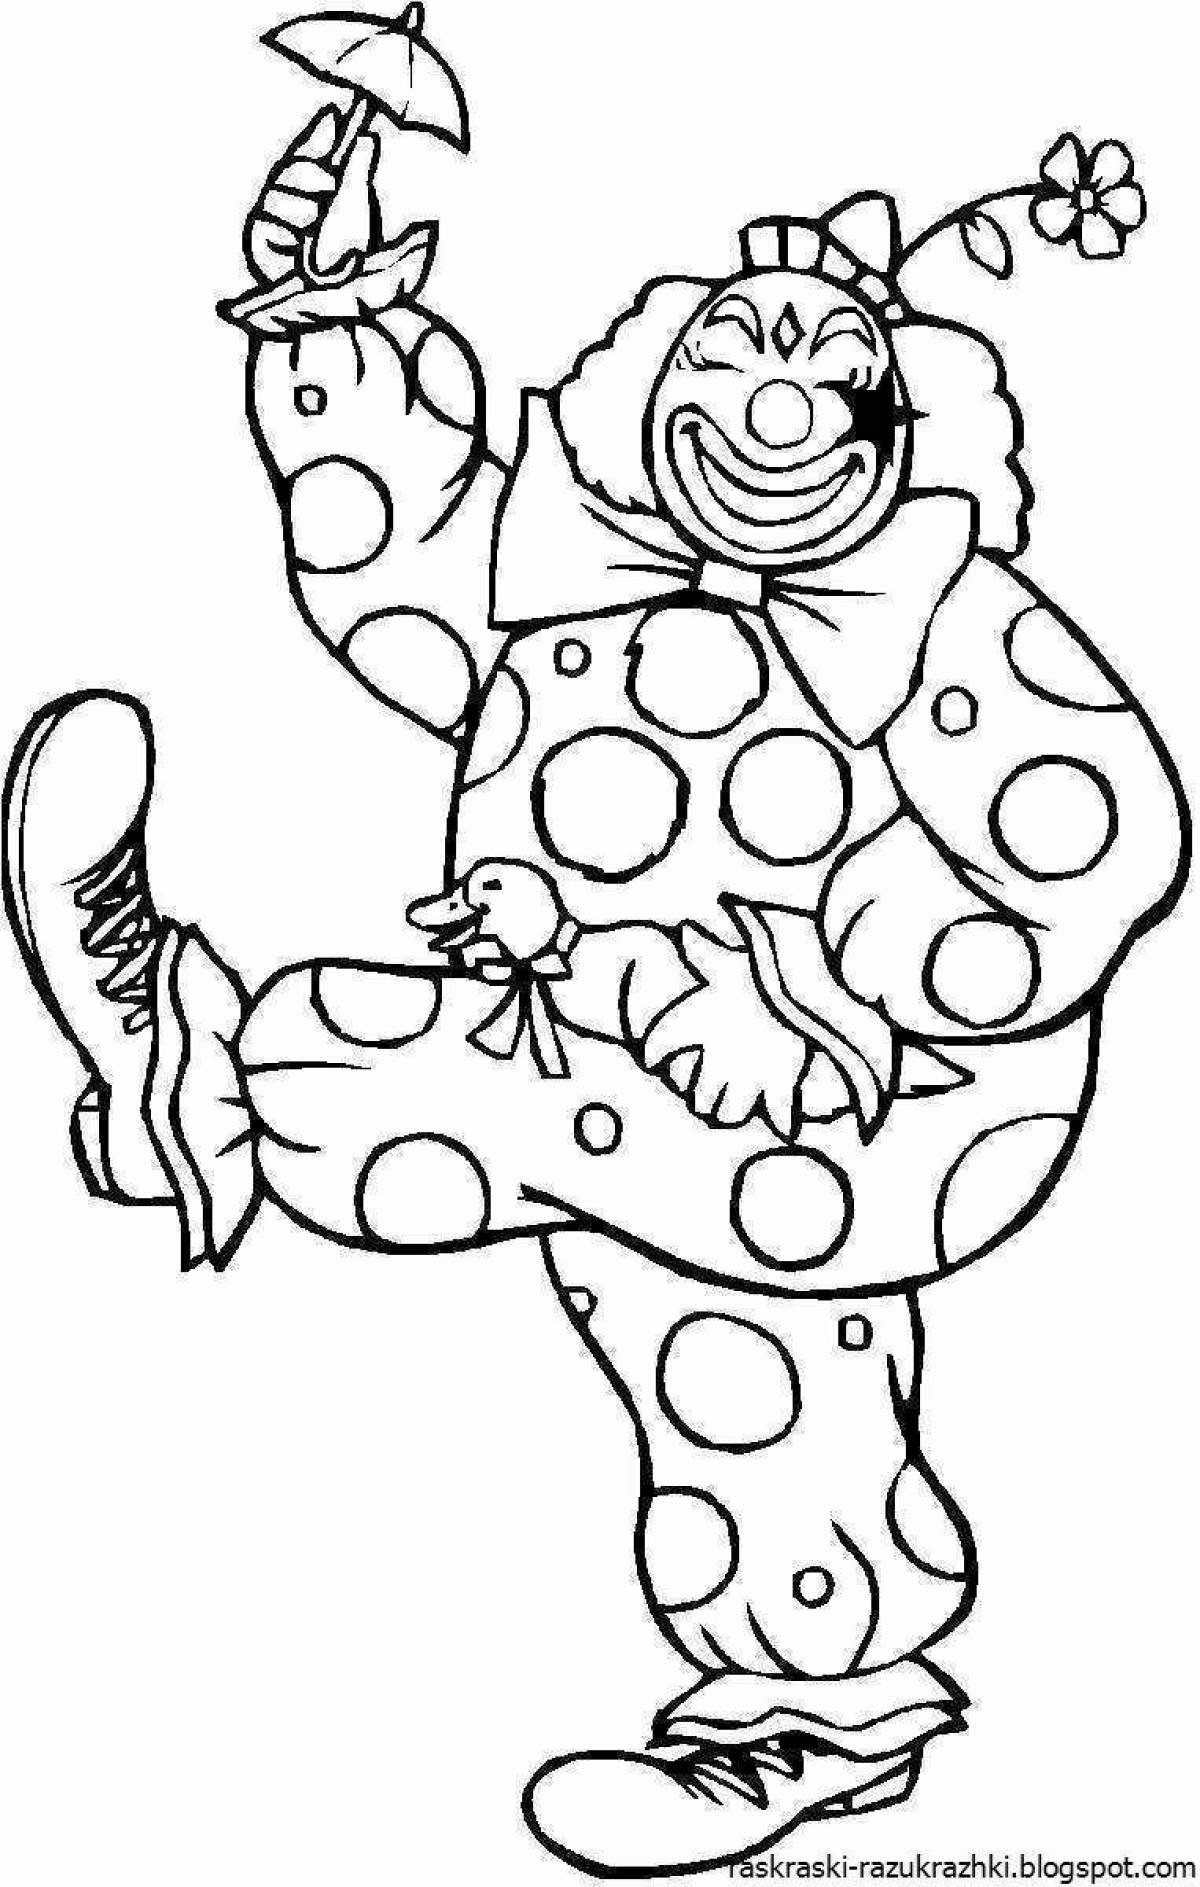 Cute funny clown coloring book for kids